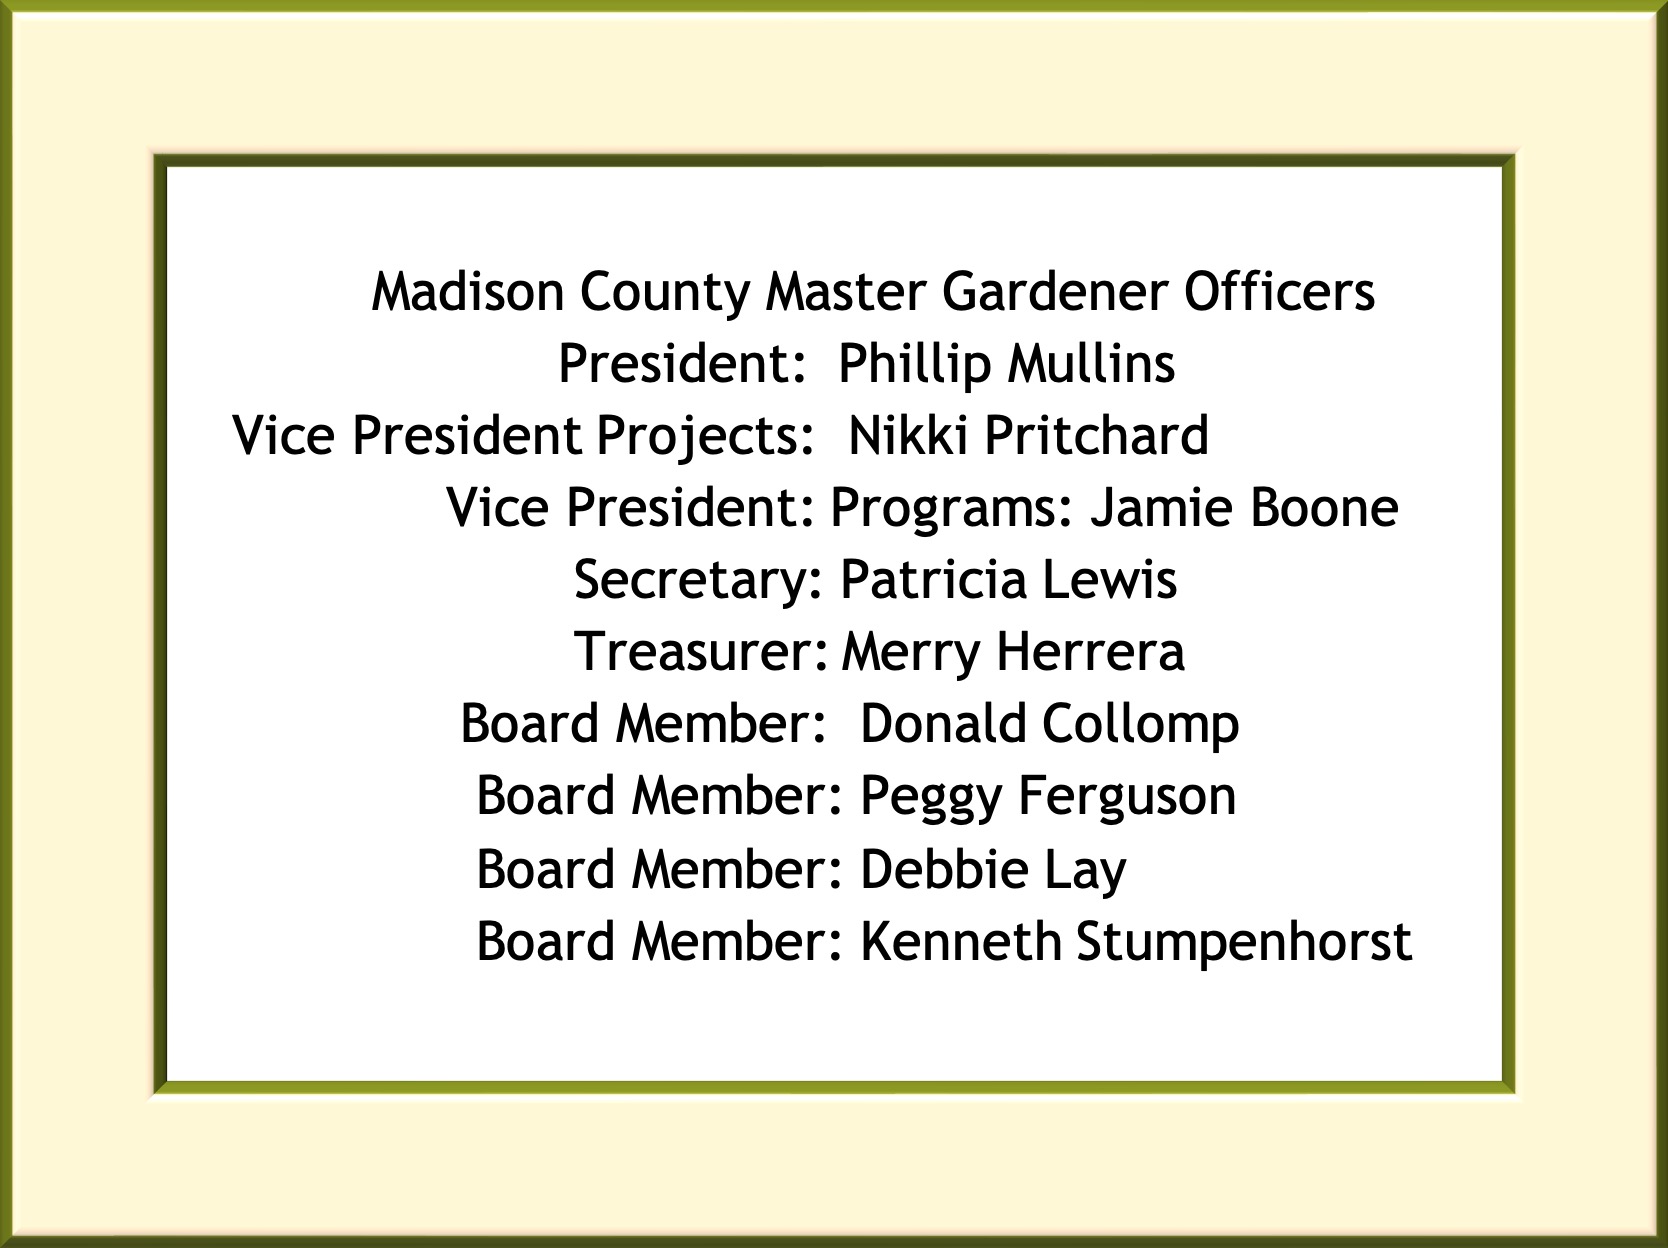 http://madisoncountymg.org/resources/2024.1_MG_News/officers%20list.jpg?timestamp=1703799212371